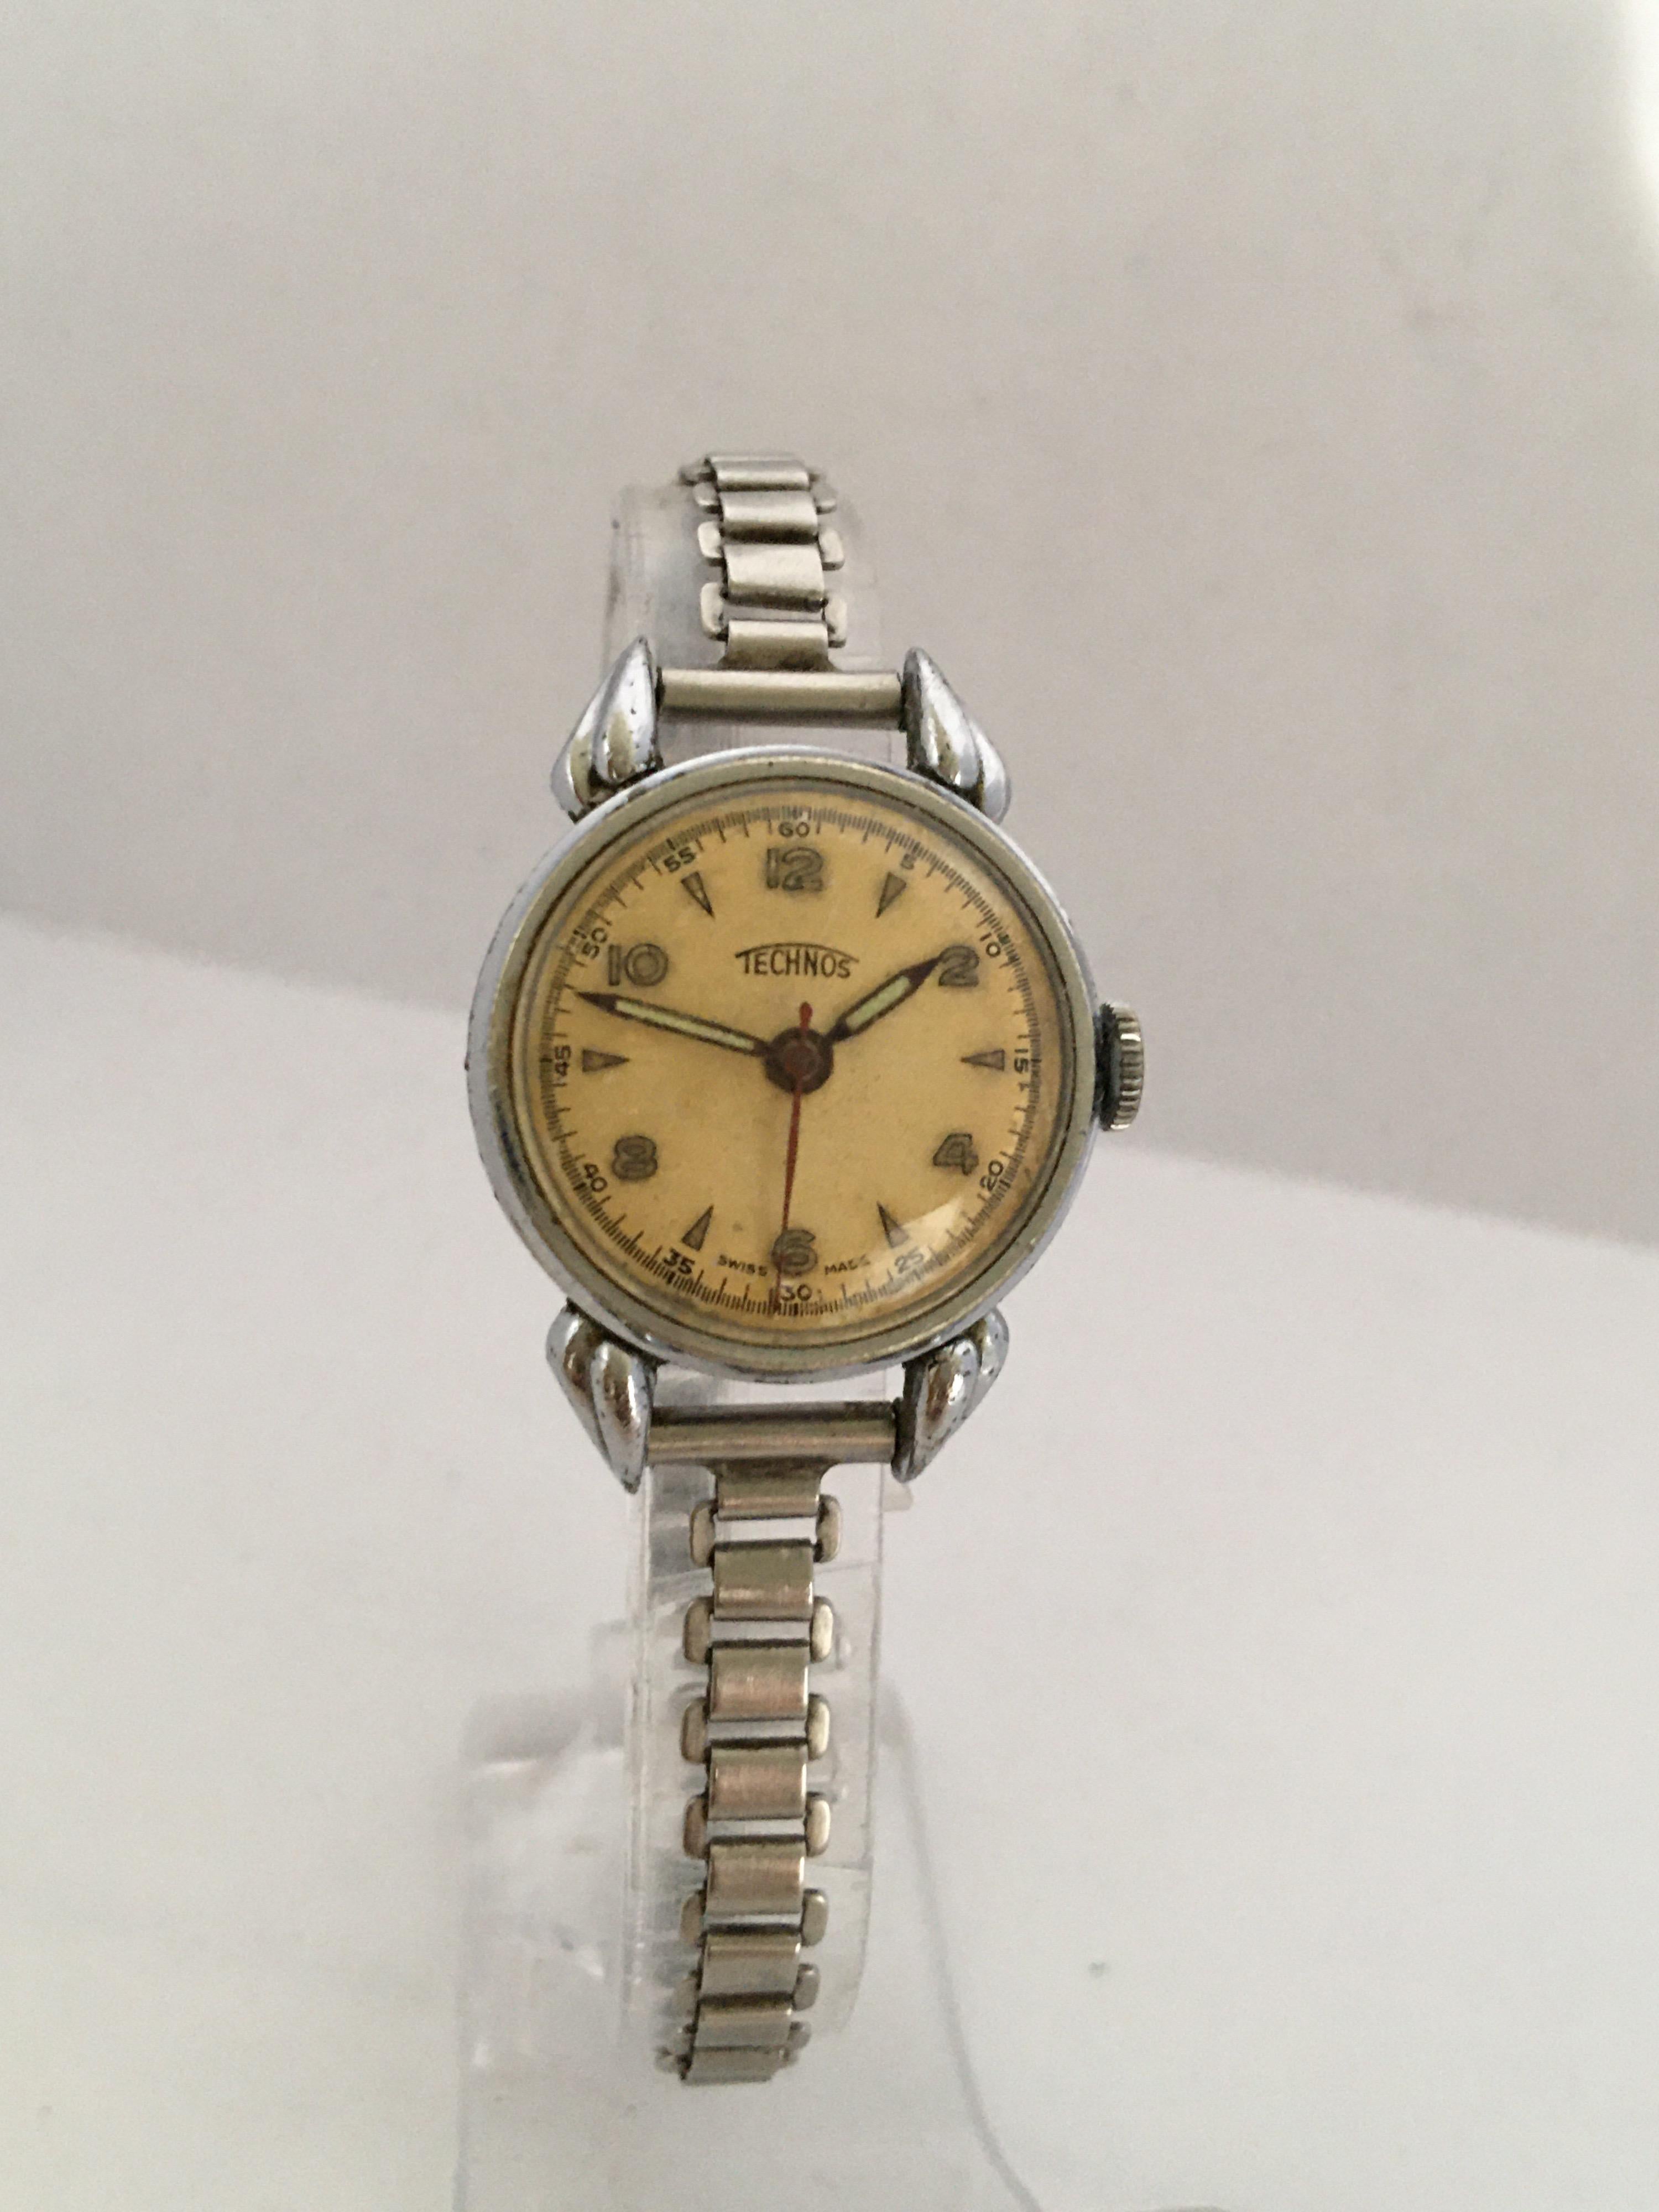 This beautiful pre-owned mechanical technos ladies watch is in good working condition and it is ticking well. Visible signs of ageing and wear with tiny scratches and tarnish on the silver plated watch case.

Please study the images carefully as